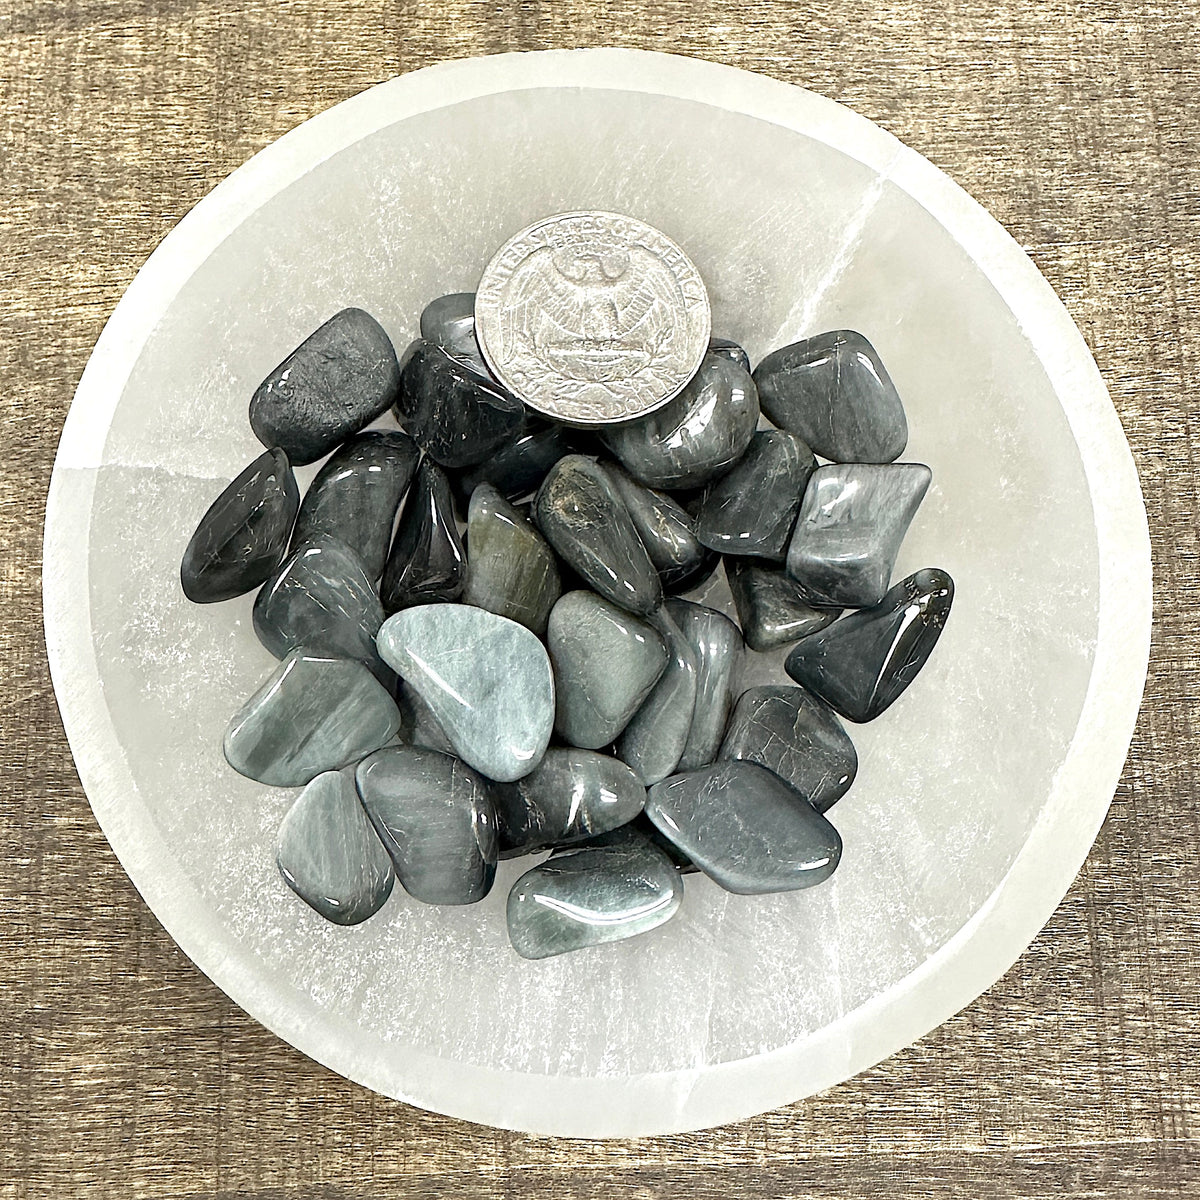 Comparison shot of a US quarter coin and various Cat's Eye tumbled stones in a bowl